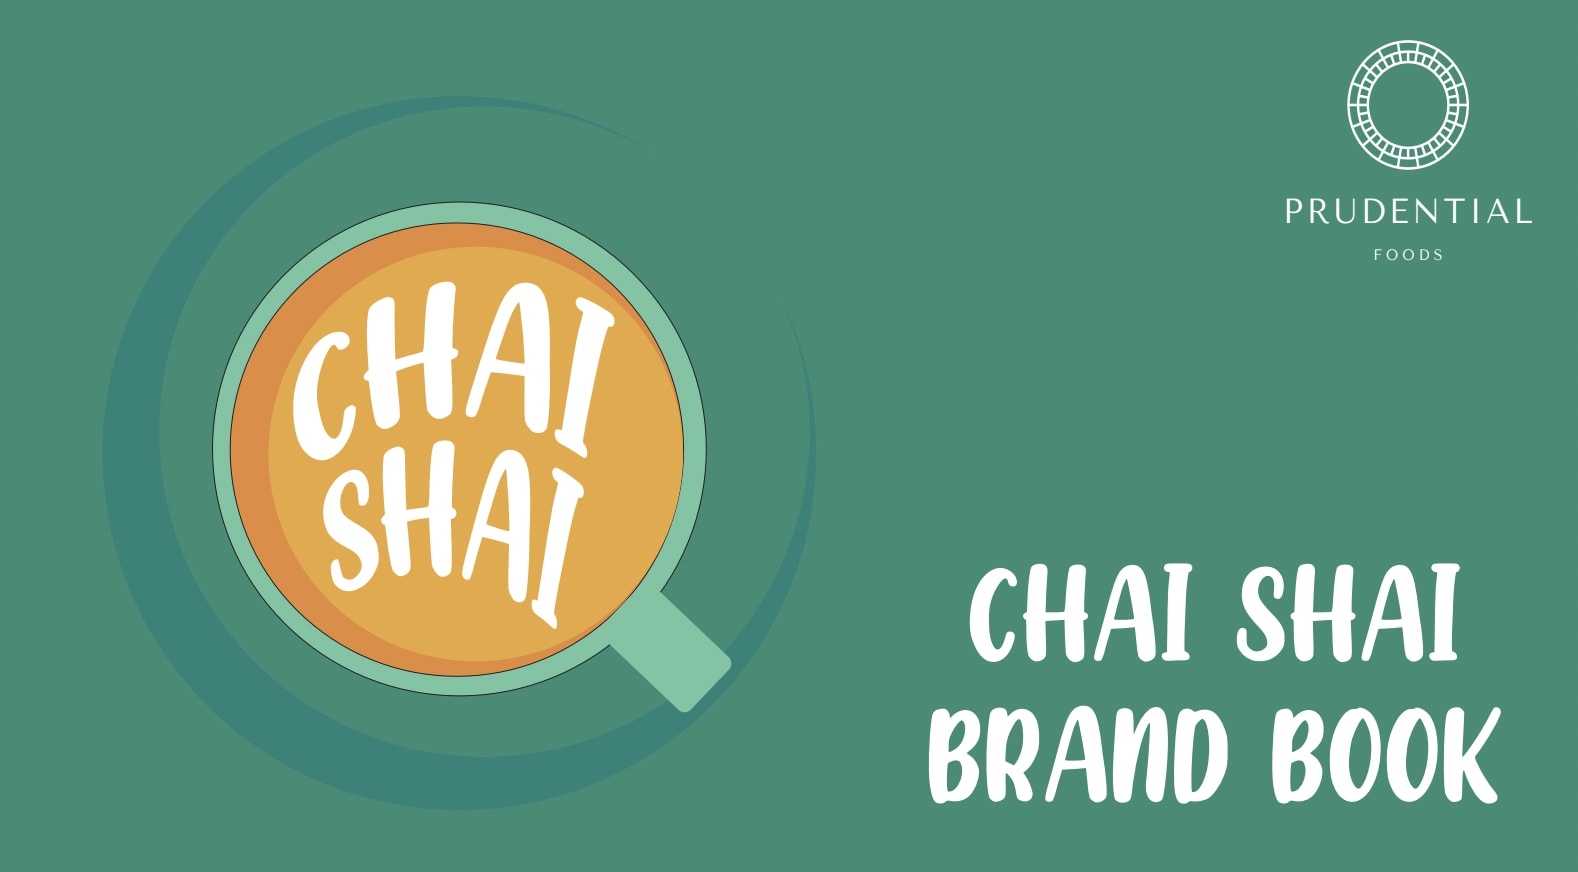 Chai For | Finally, Real Chai. Real Spices. Real Flavor. Real Easy.